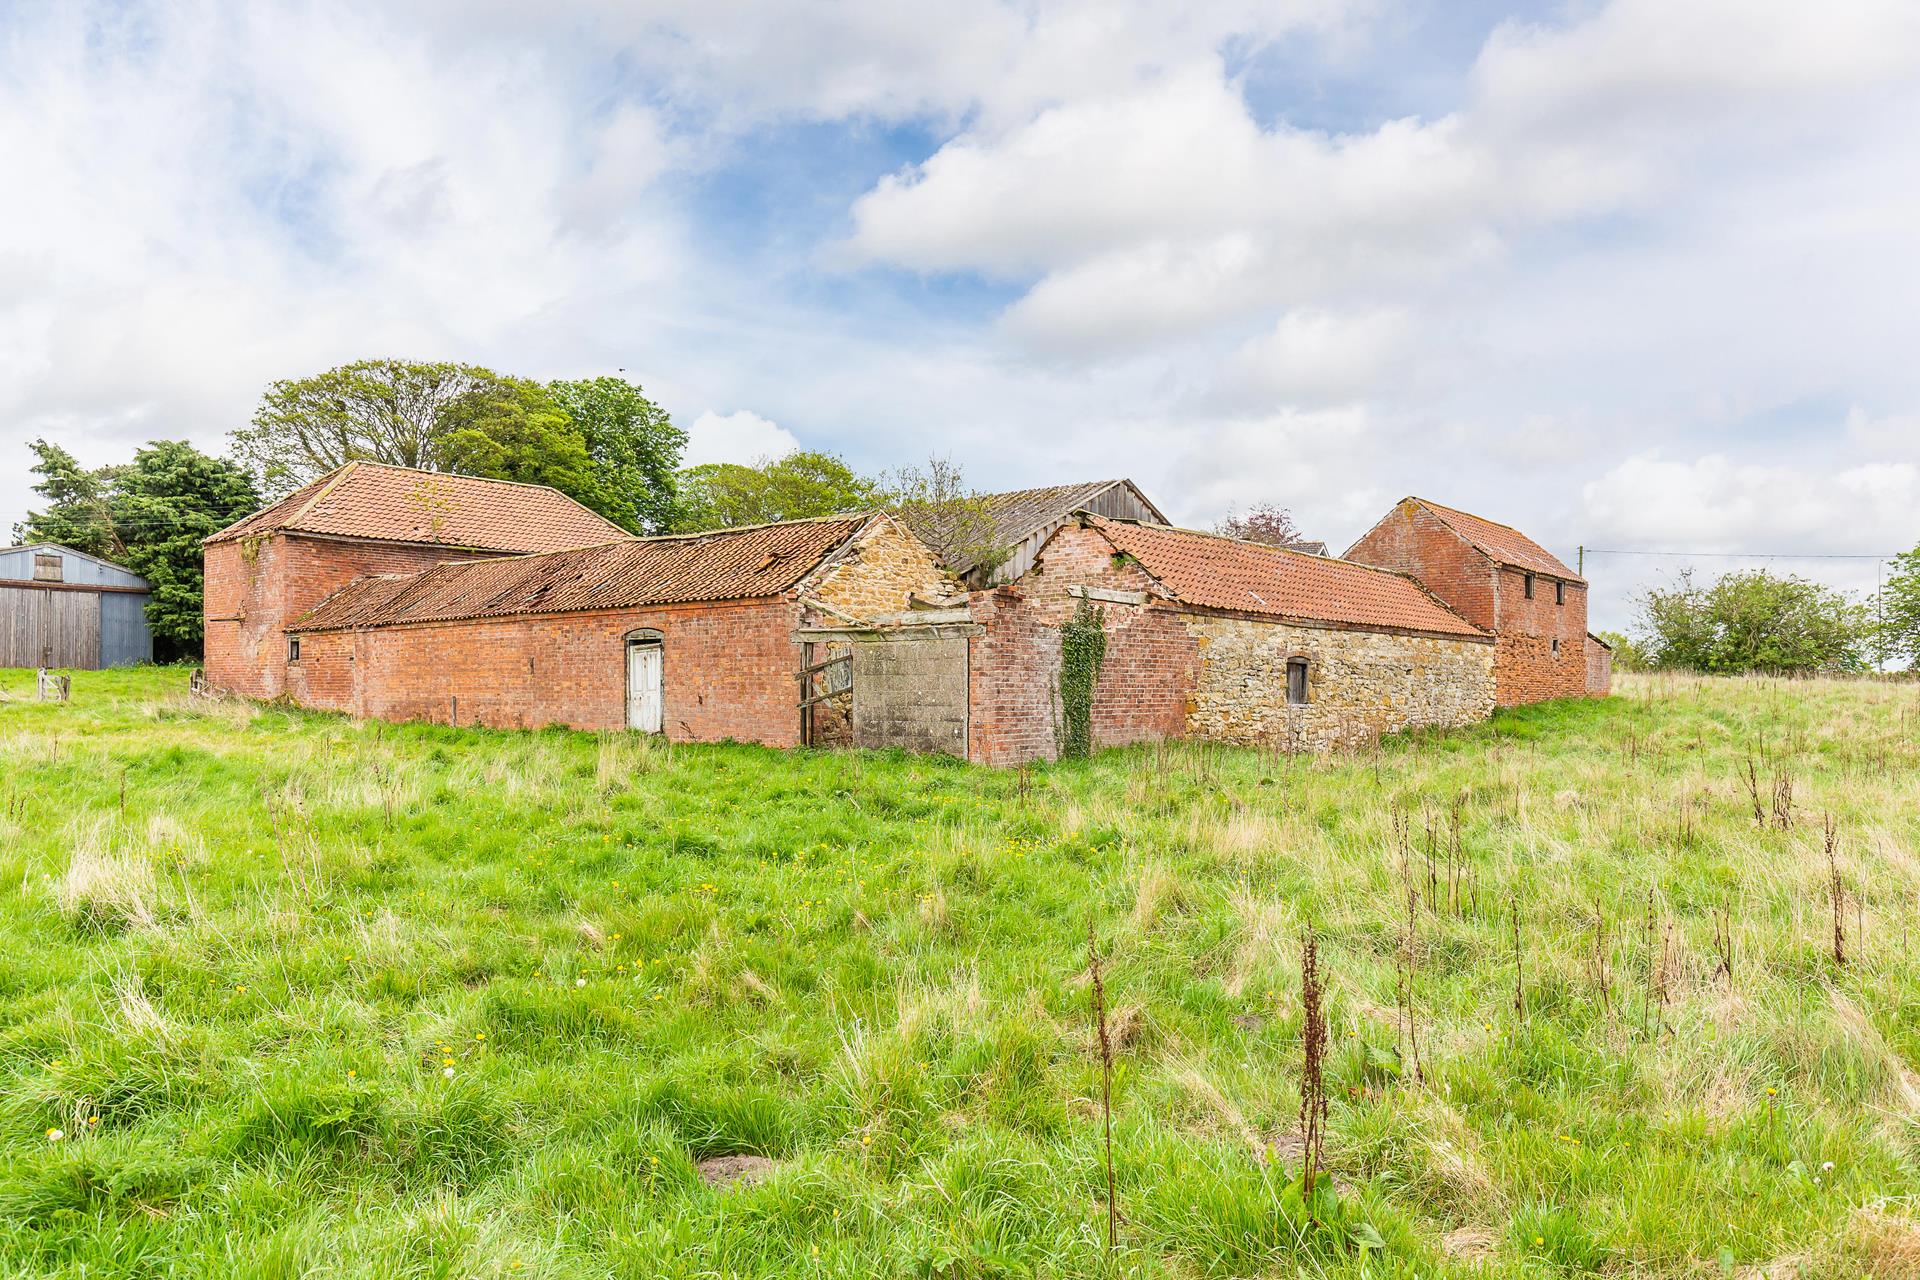 Looking to convert a range of barns into a rural idyll?